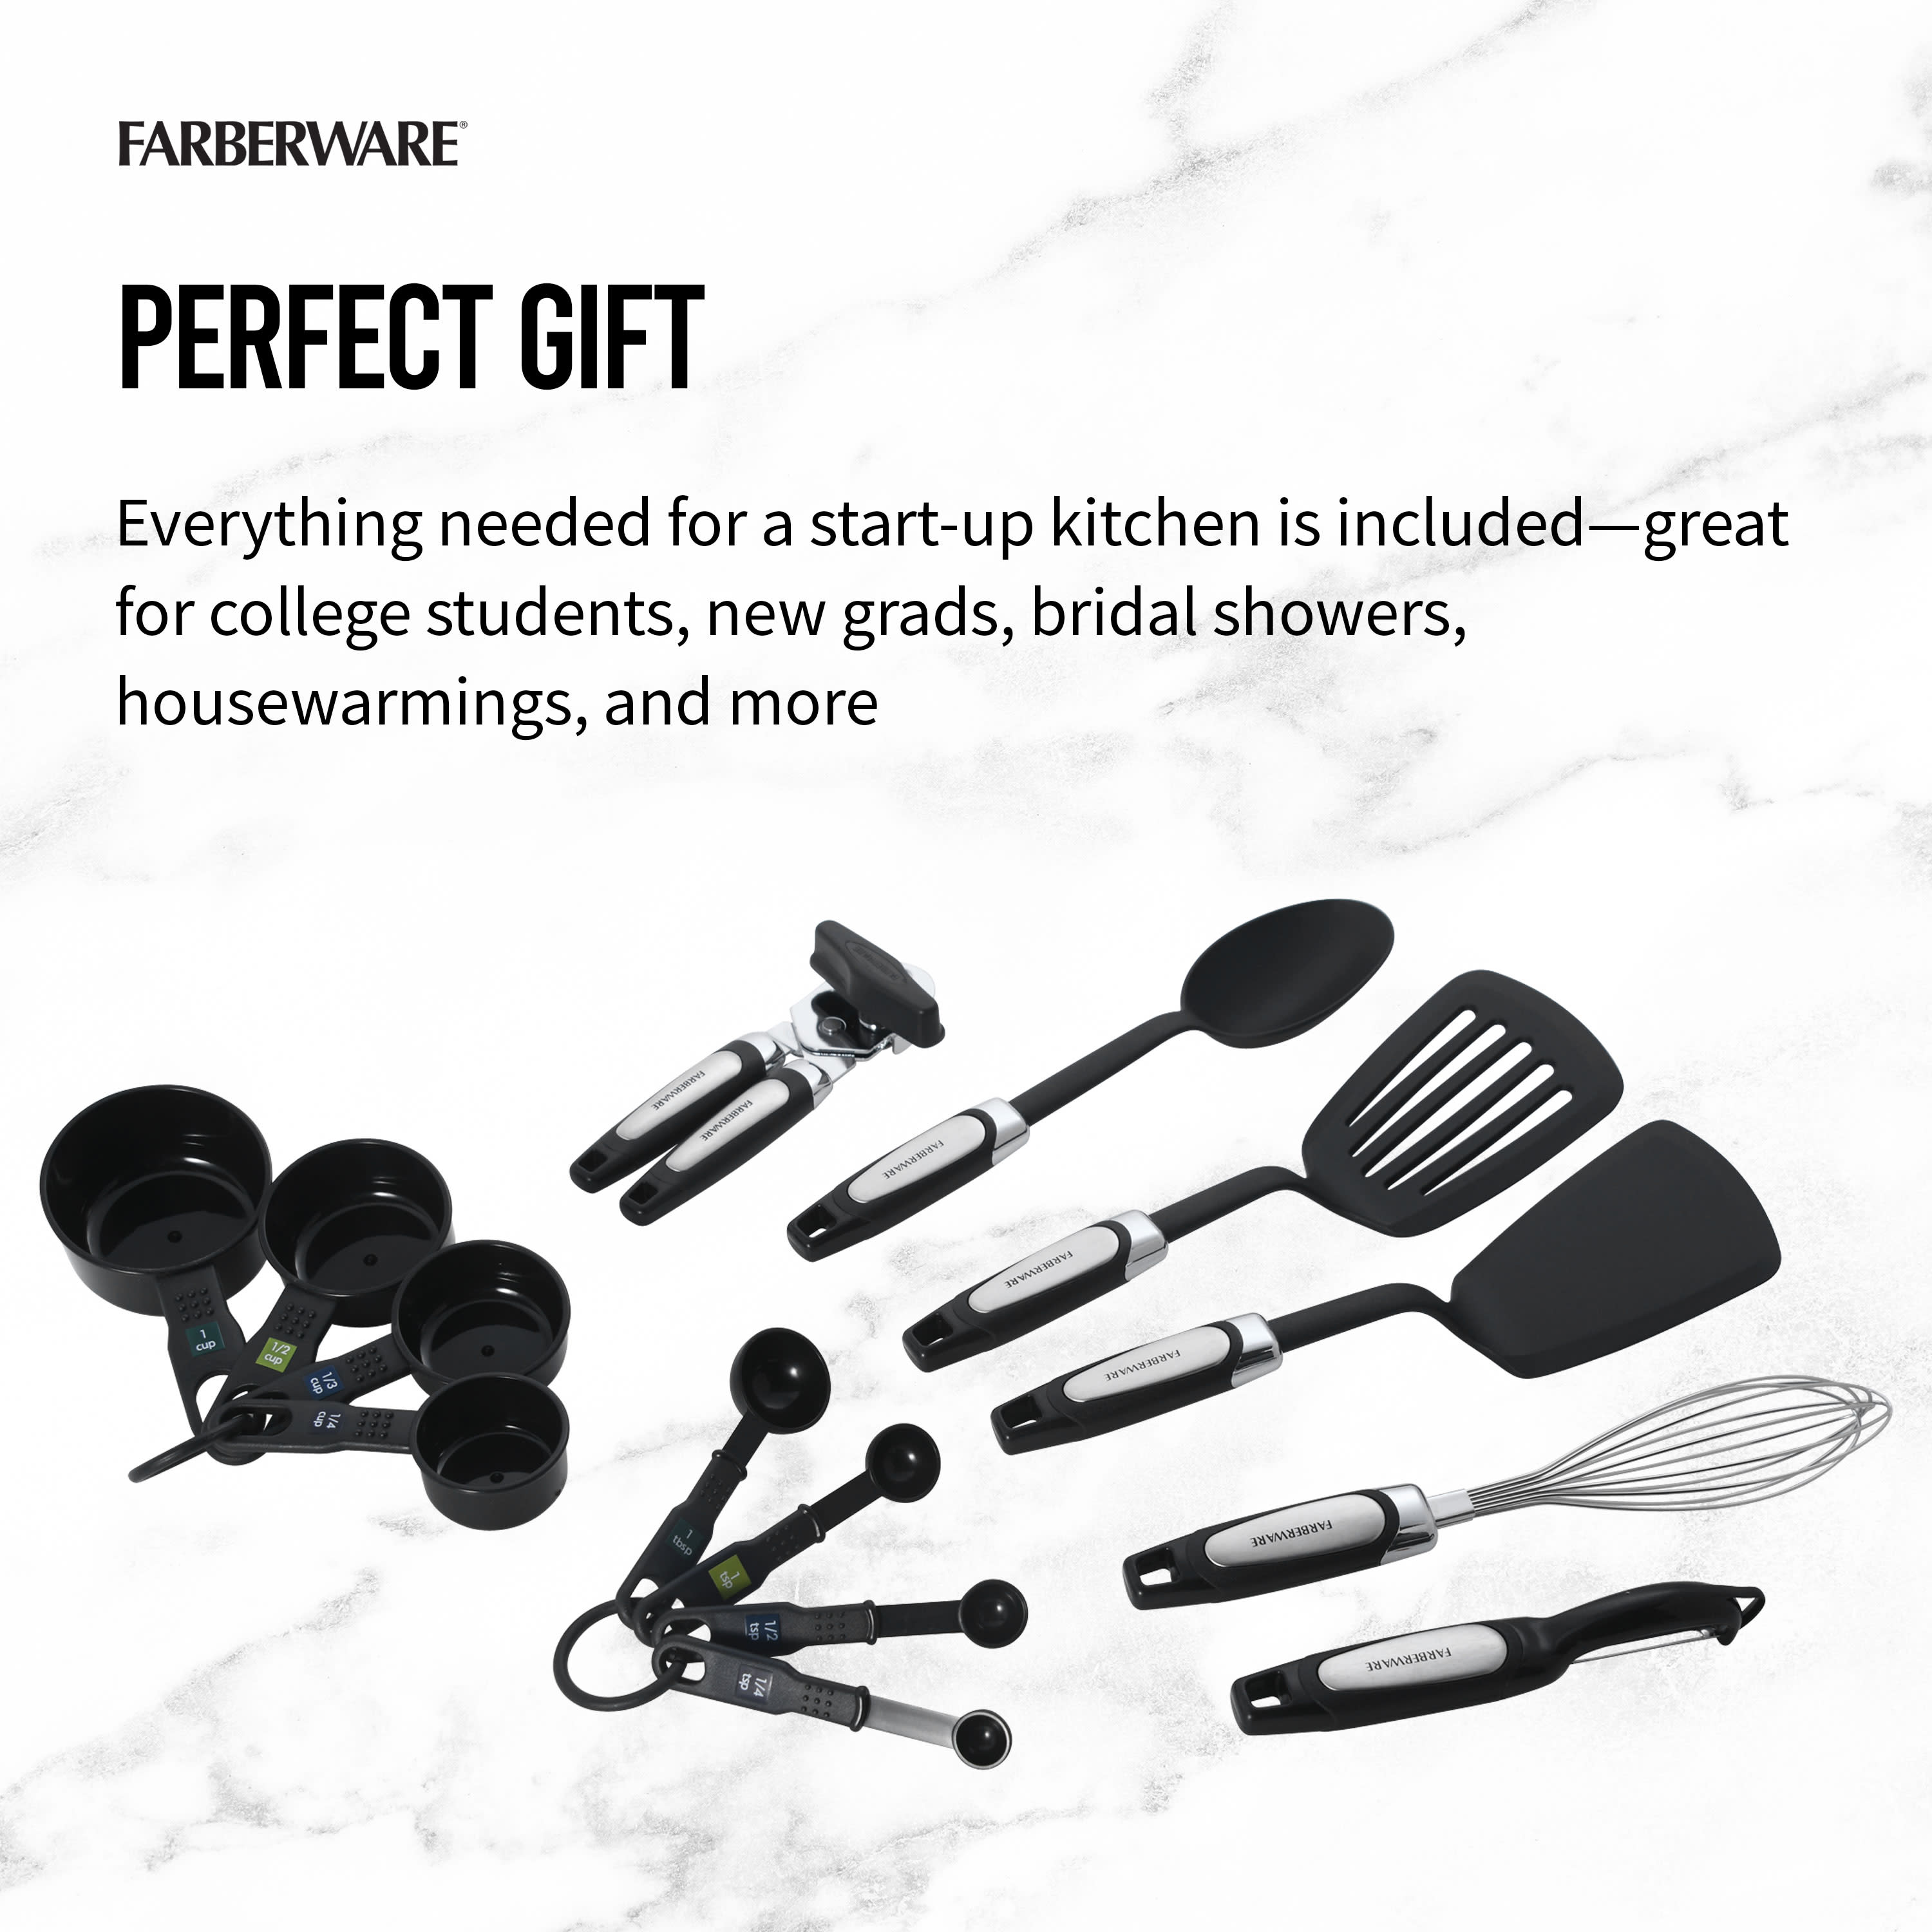 Farberware Professional 14-piece Kitchen Tool and Gadget Set in Black - image 5 of 19